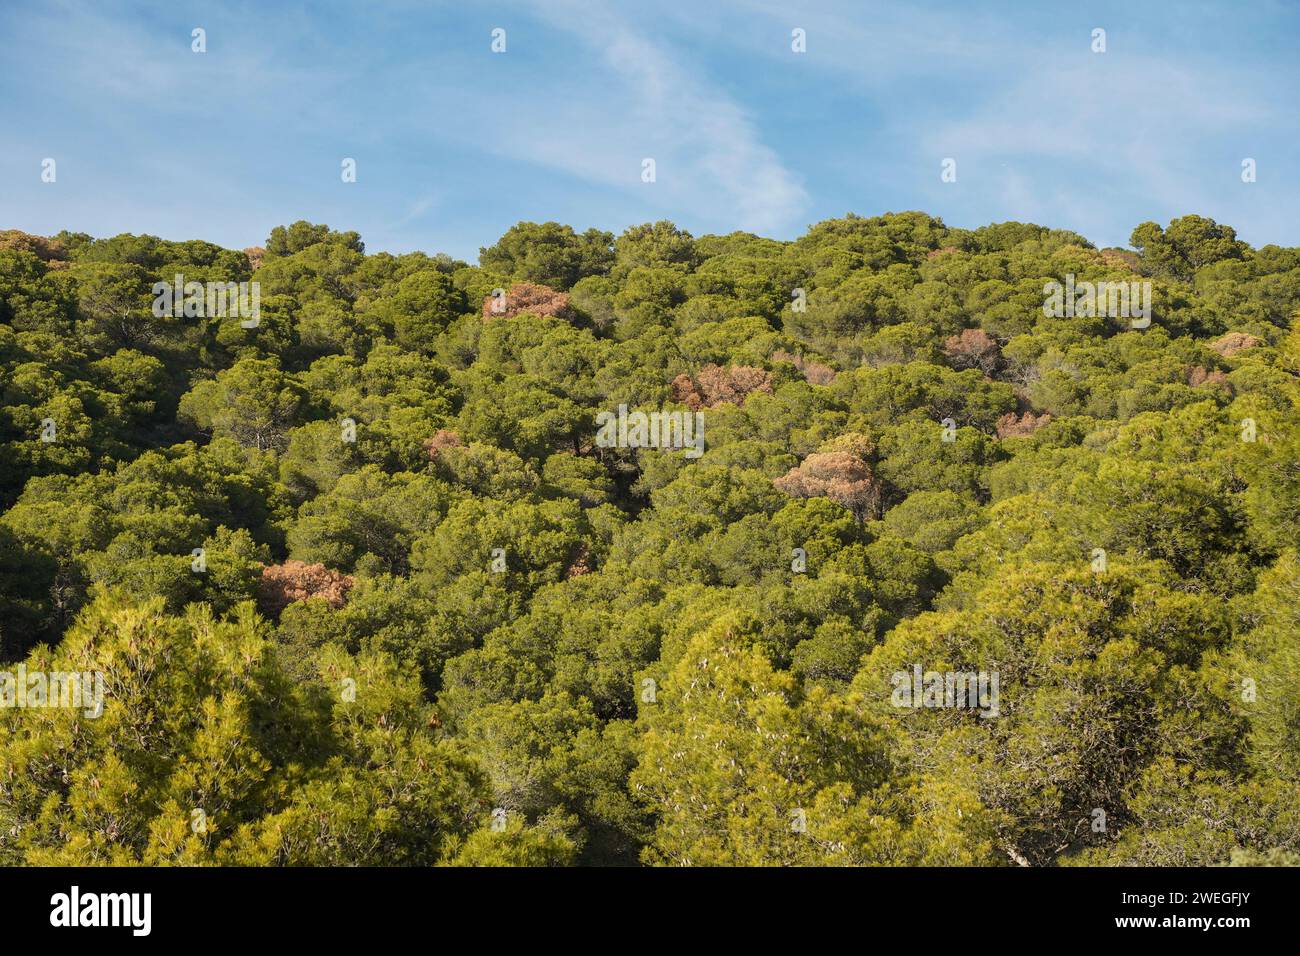 Pine forest in Sierra de Mijas Mountains with dead Aleppo pine trees. Southern Spain. Stock Photo